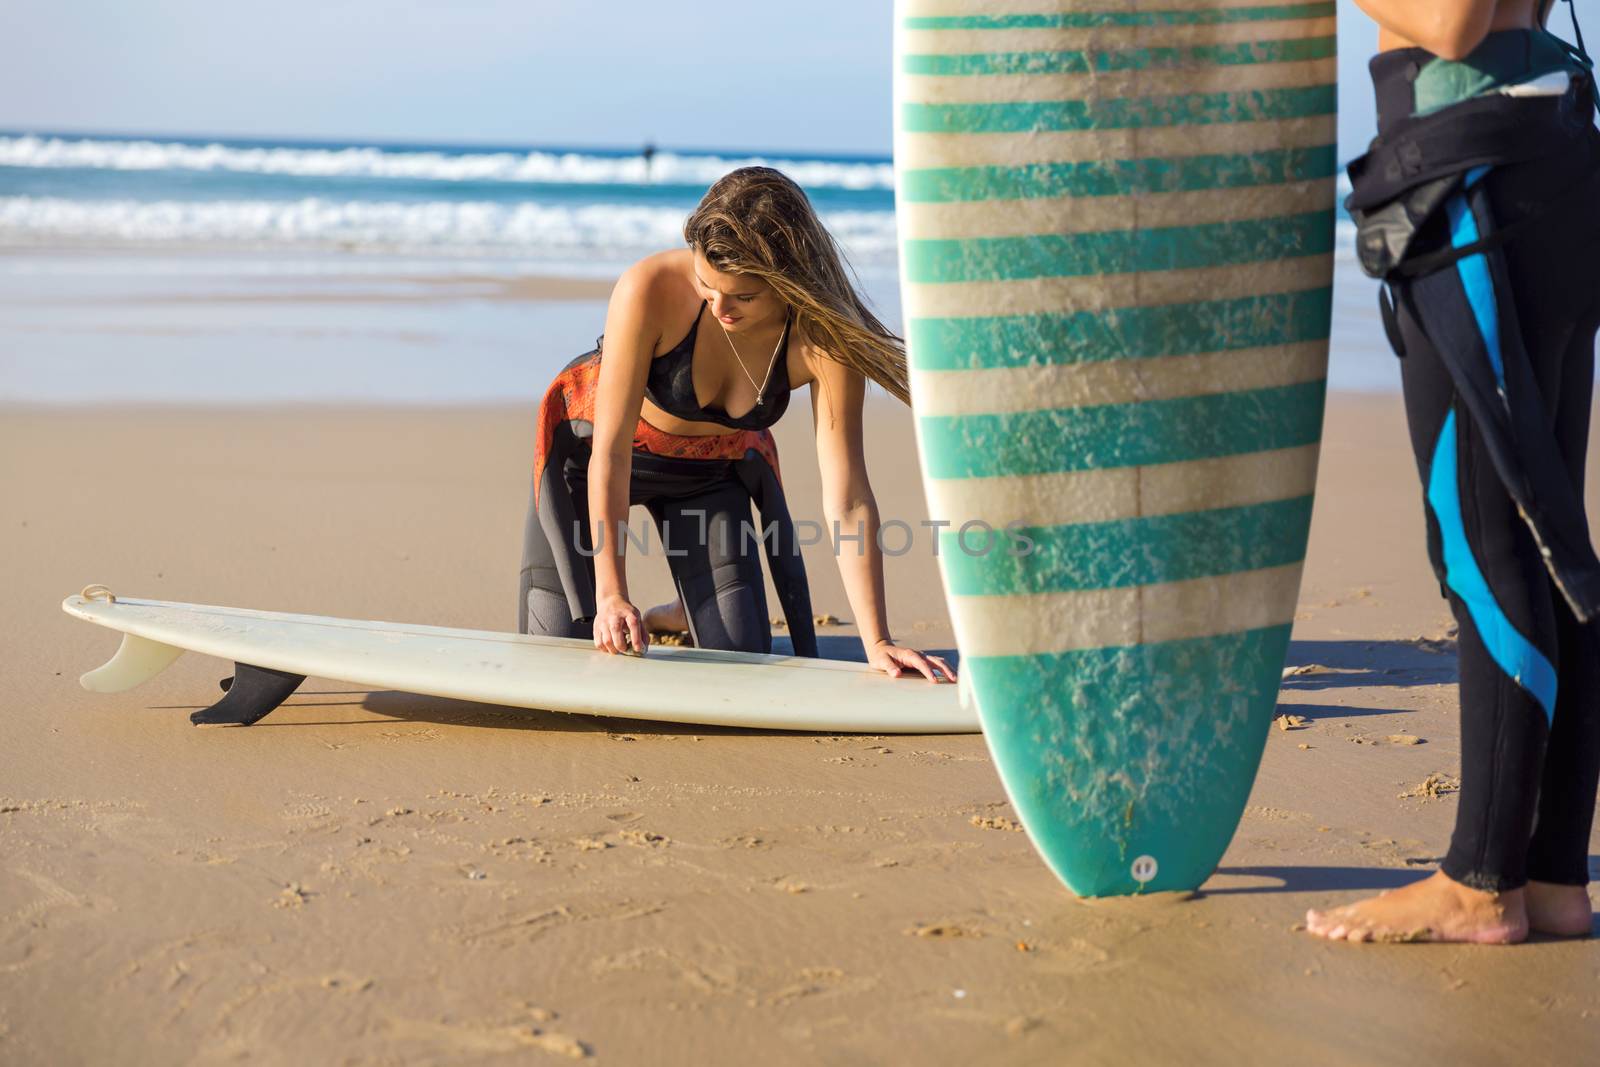 Two beautiful surfer girls at the beach getting ready for surfing